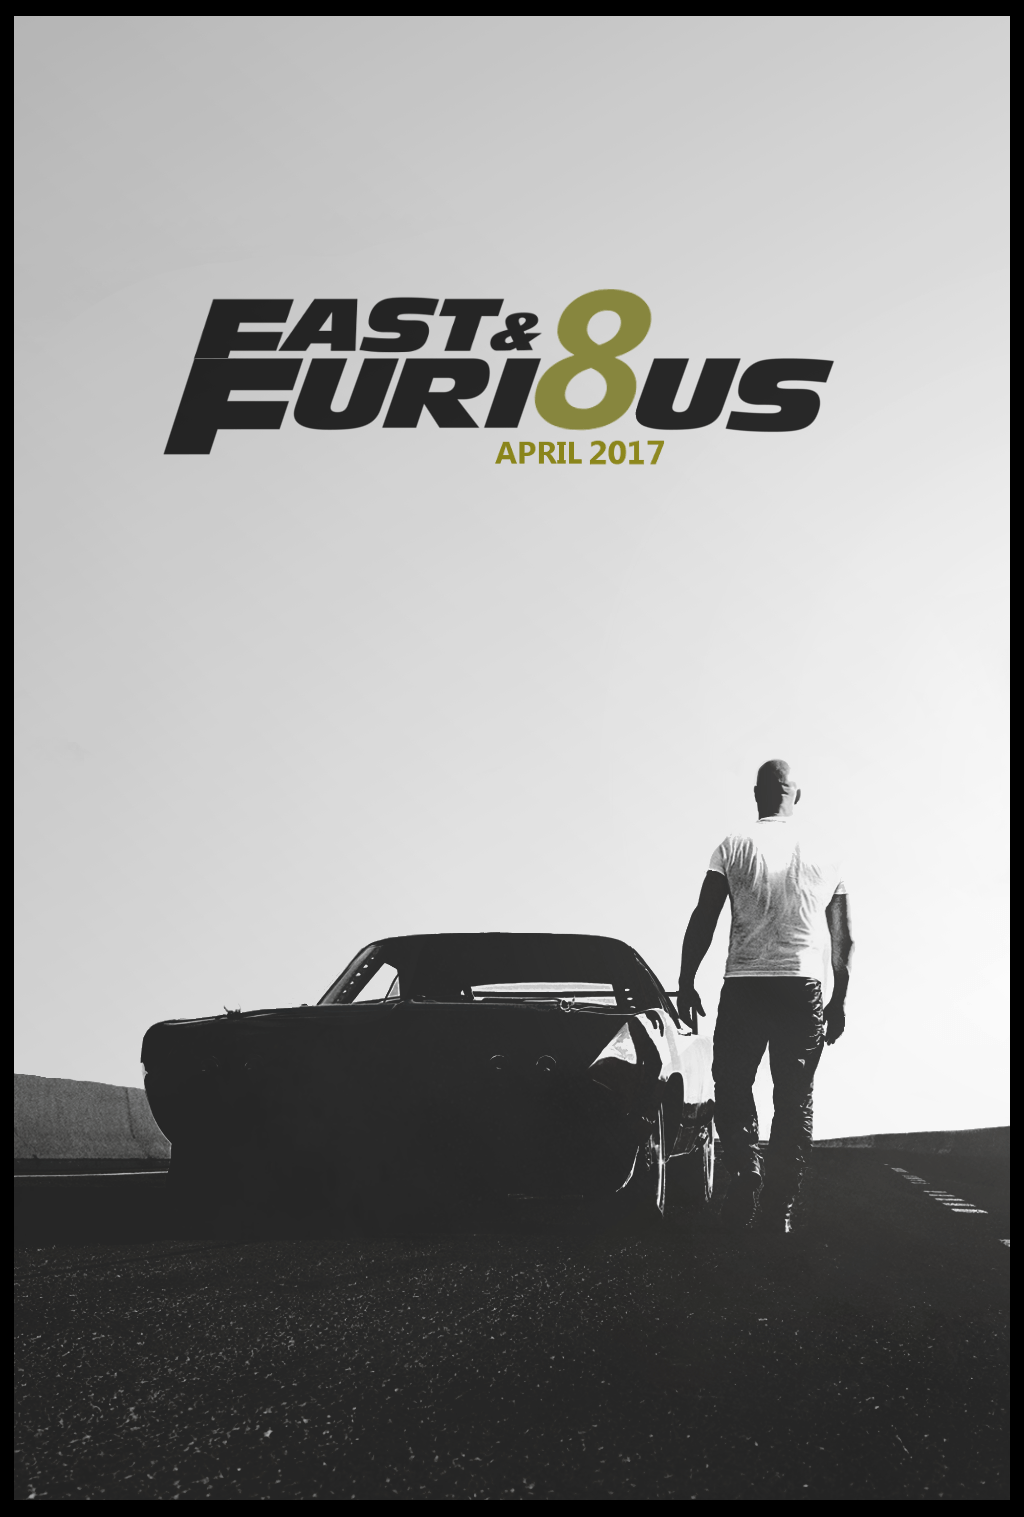 Fast and Furious 8 Movie 4k Uhd wallpaper 2017